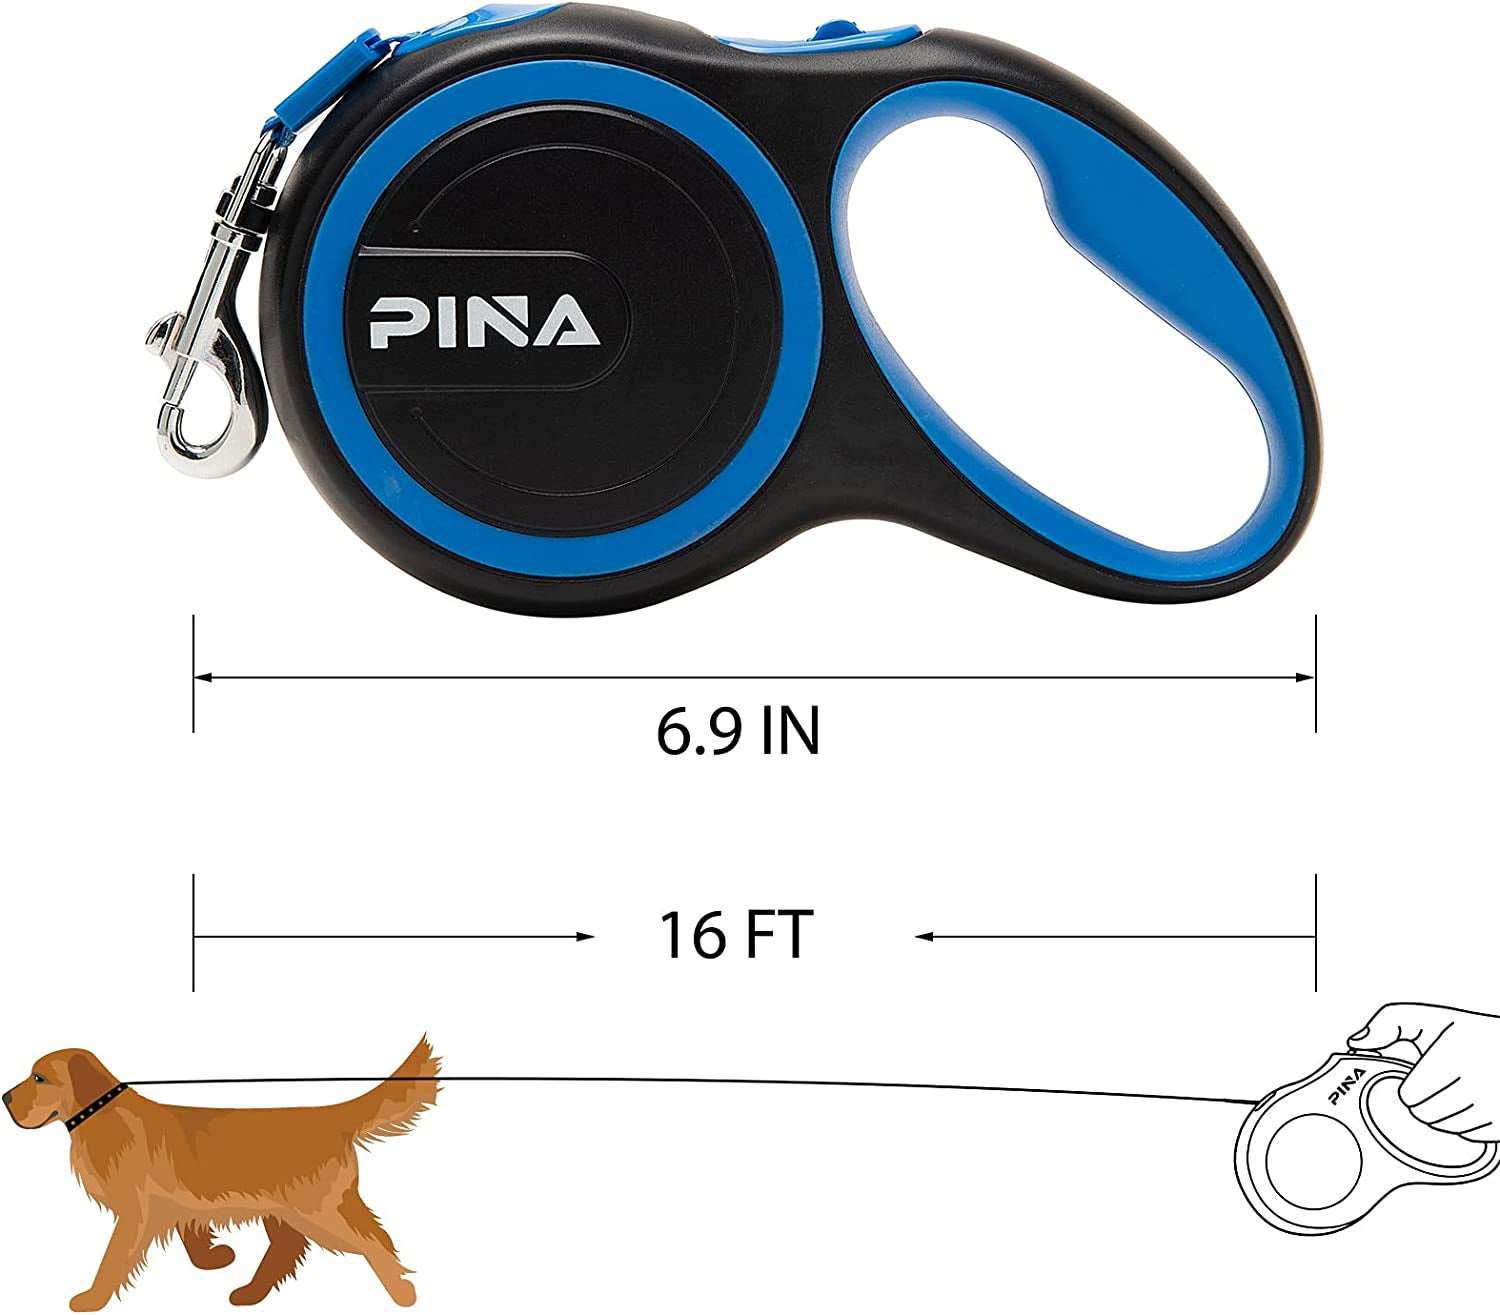 Retractable Dog Leash, Tangle-Free Strong Reflective Nylon Tape, with Anti-Slip Handle, One-Handed Brake, Pause, Lock - Black Blue